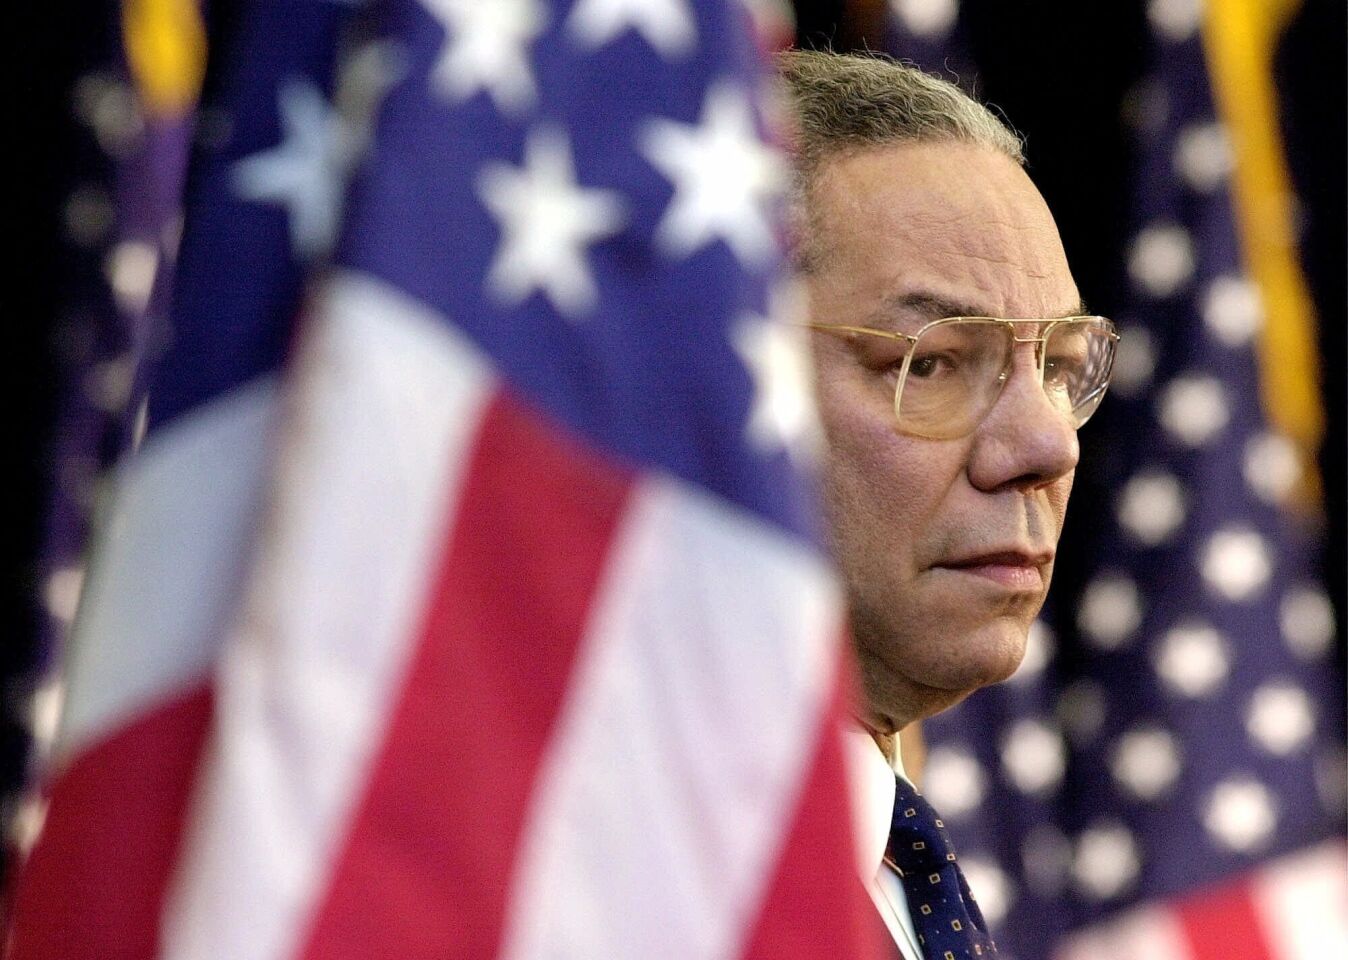 Secretary of State Colin Powell is flanked by U.S. flags